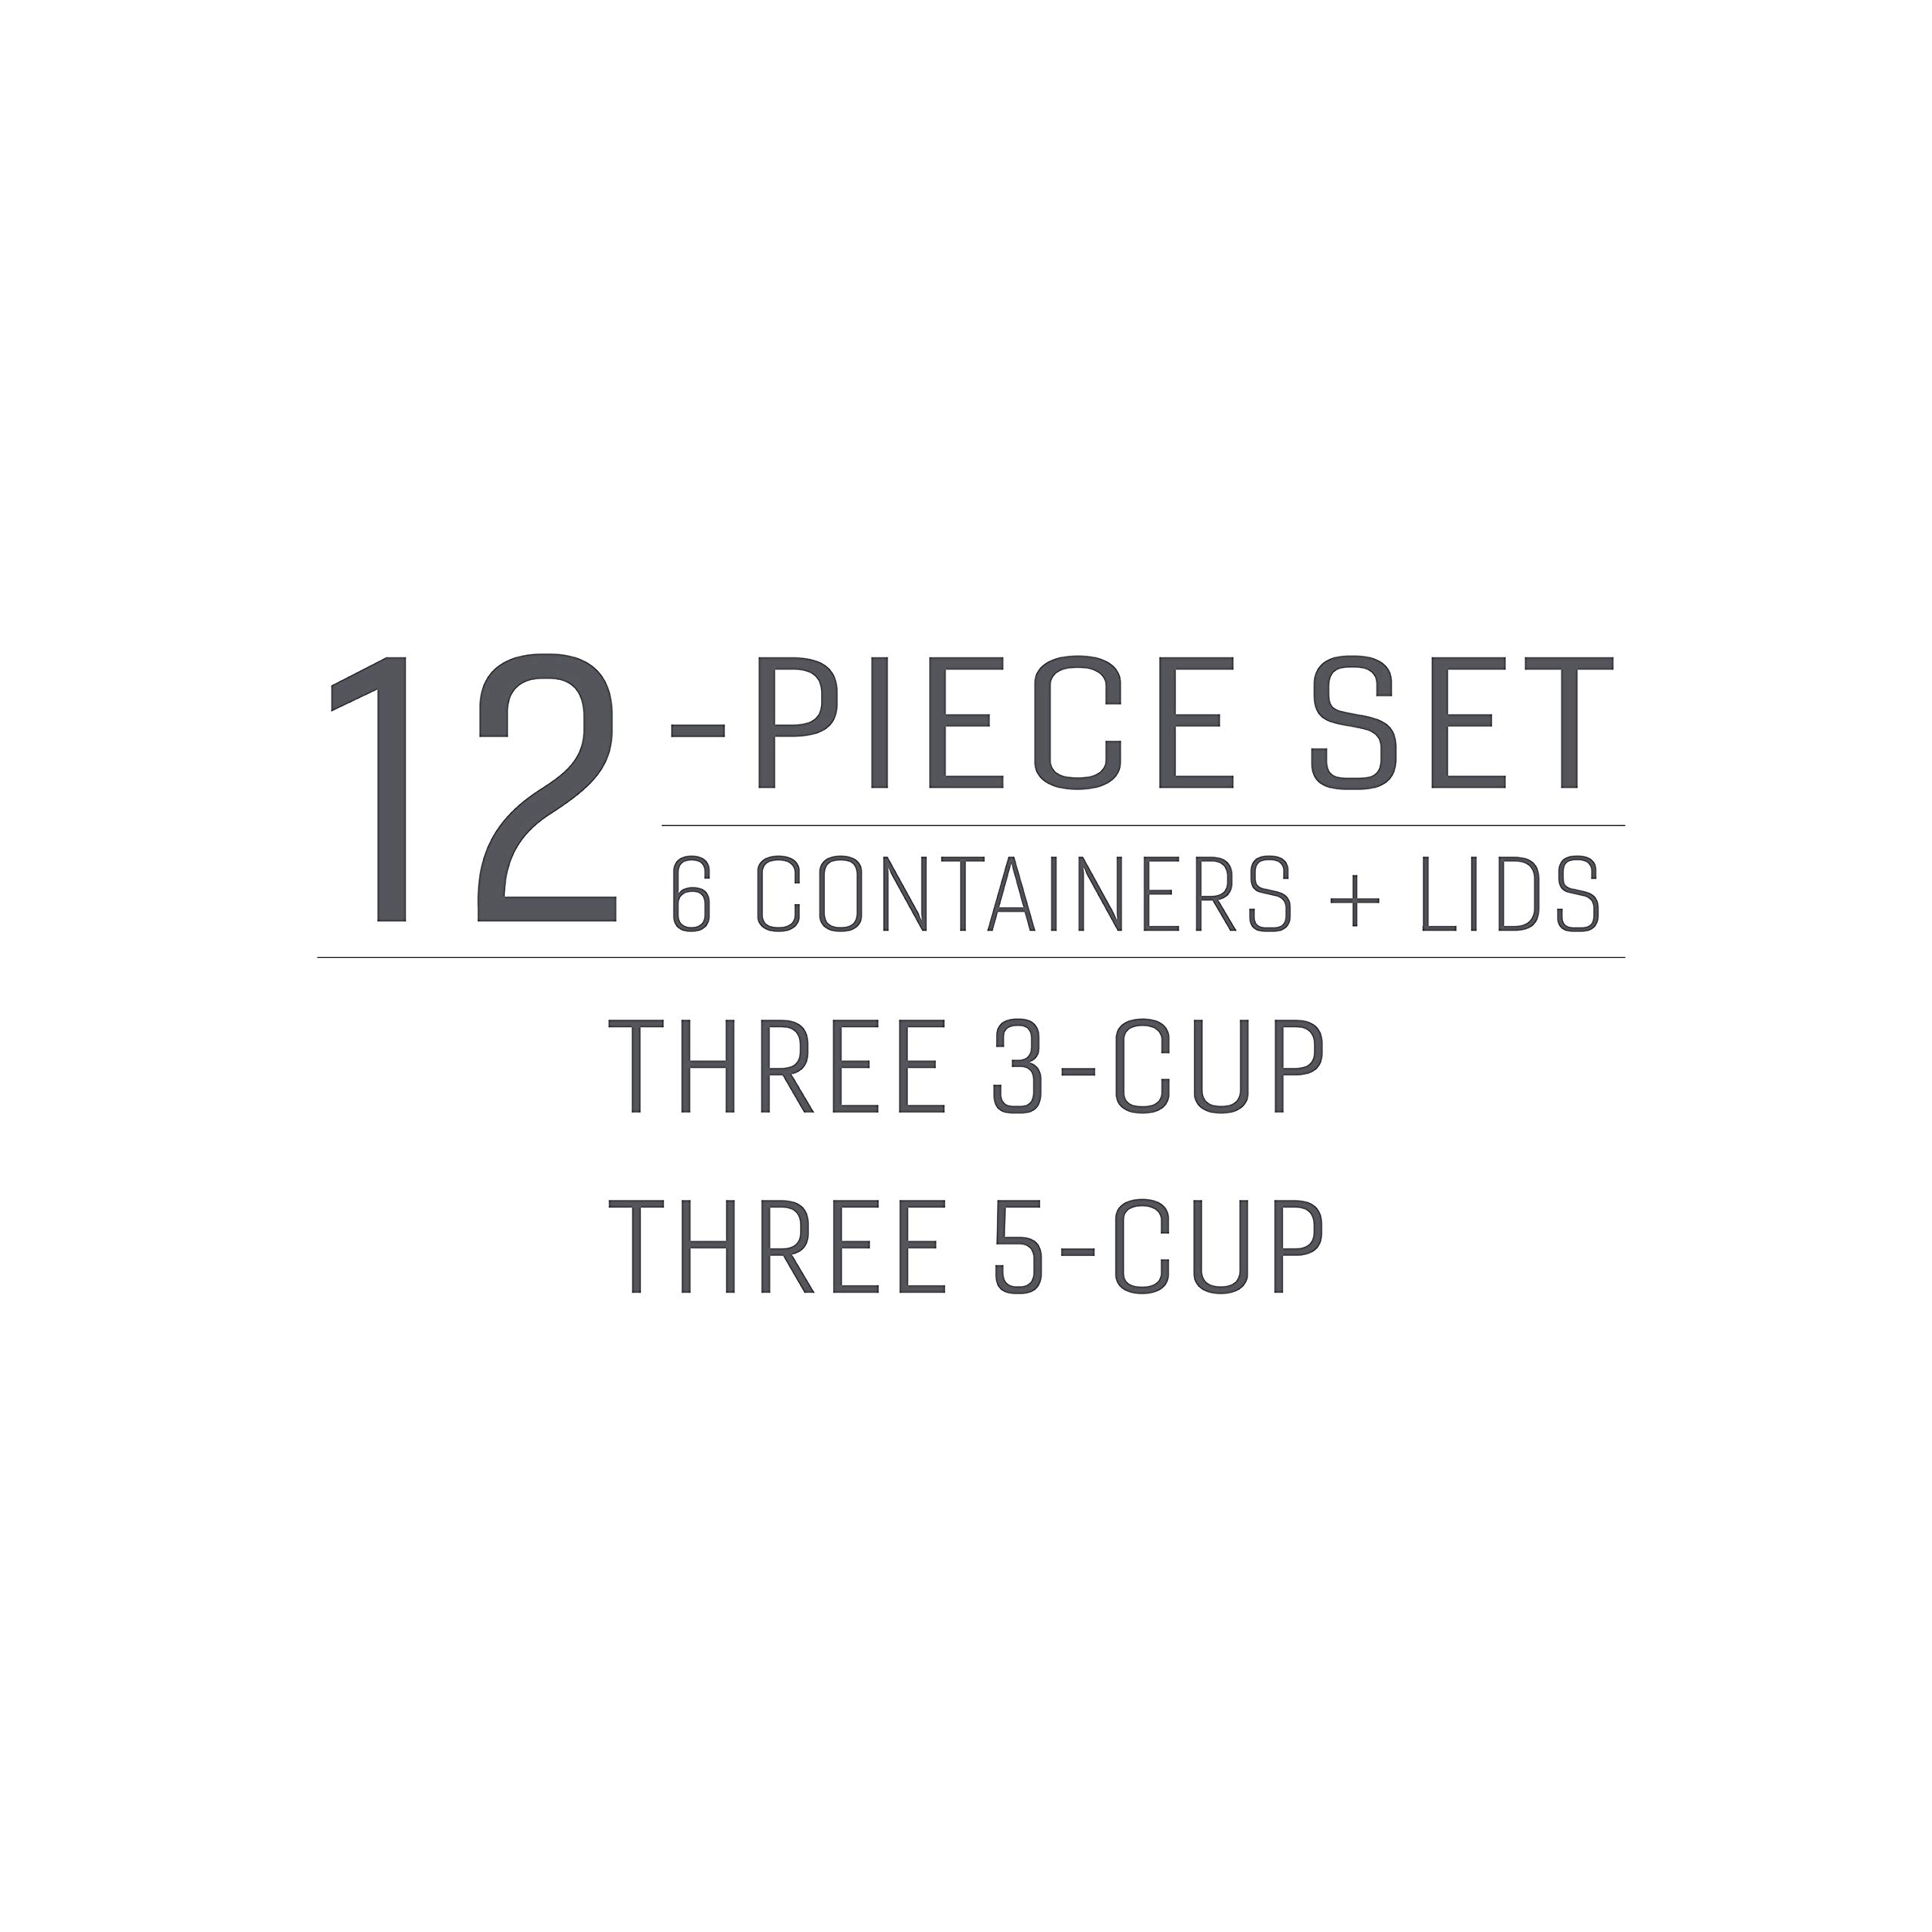 Rubbermaid EasyFindLids with Press & Lock Leak Proof Lids Food Storage Set, Meal Prep Containers, 12 Piece, Clear